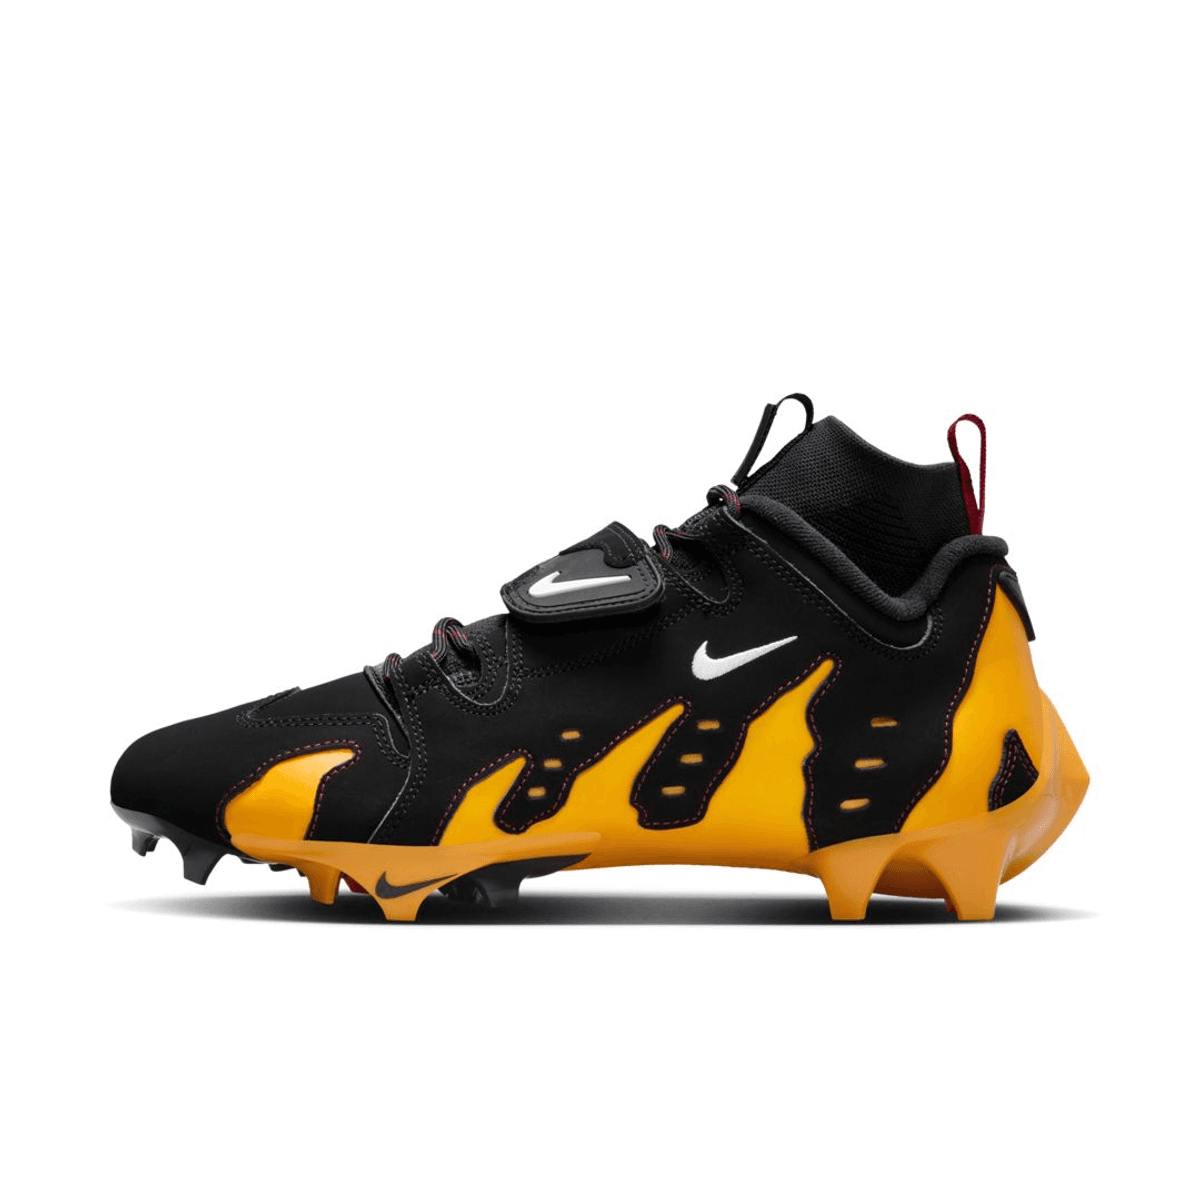 First Look At The Nike Air DT Max '96 Cleats "Kyler Murray PE"